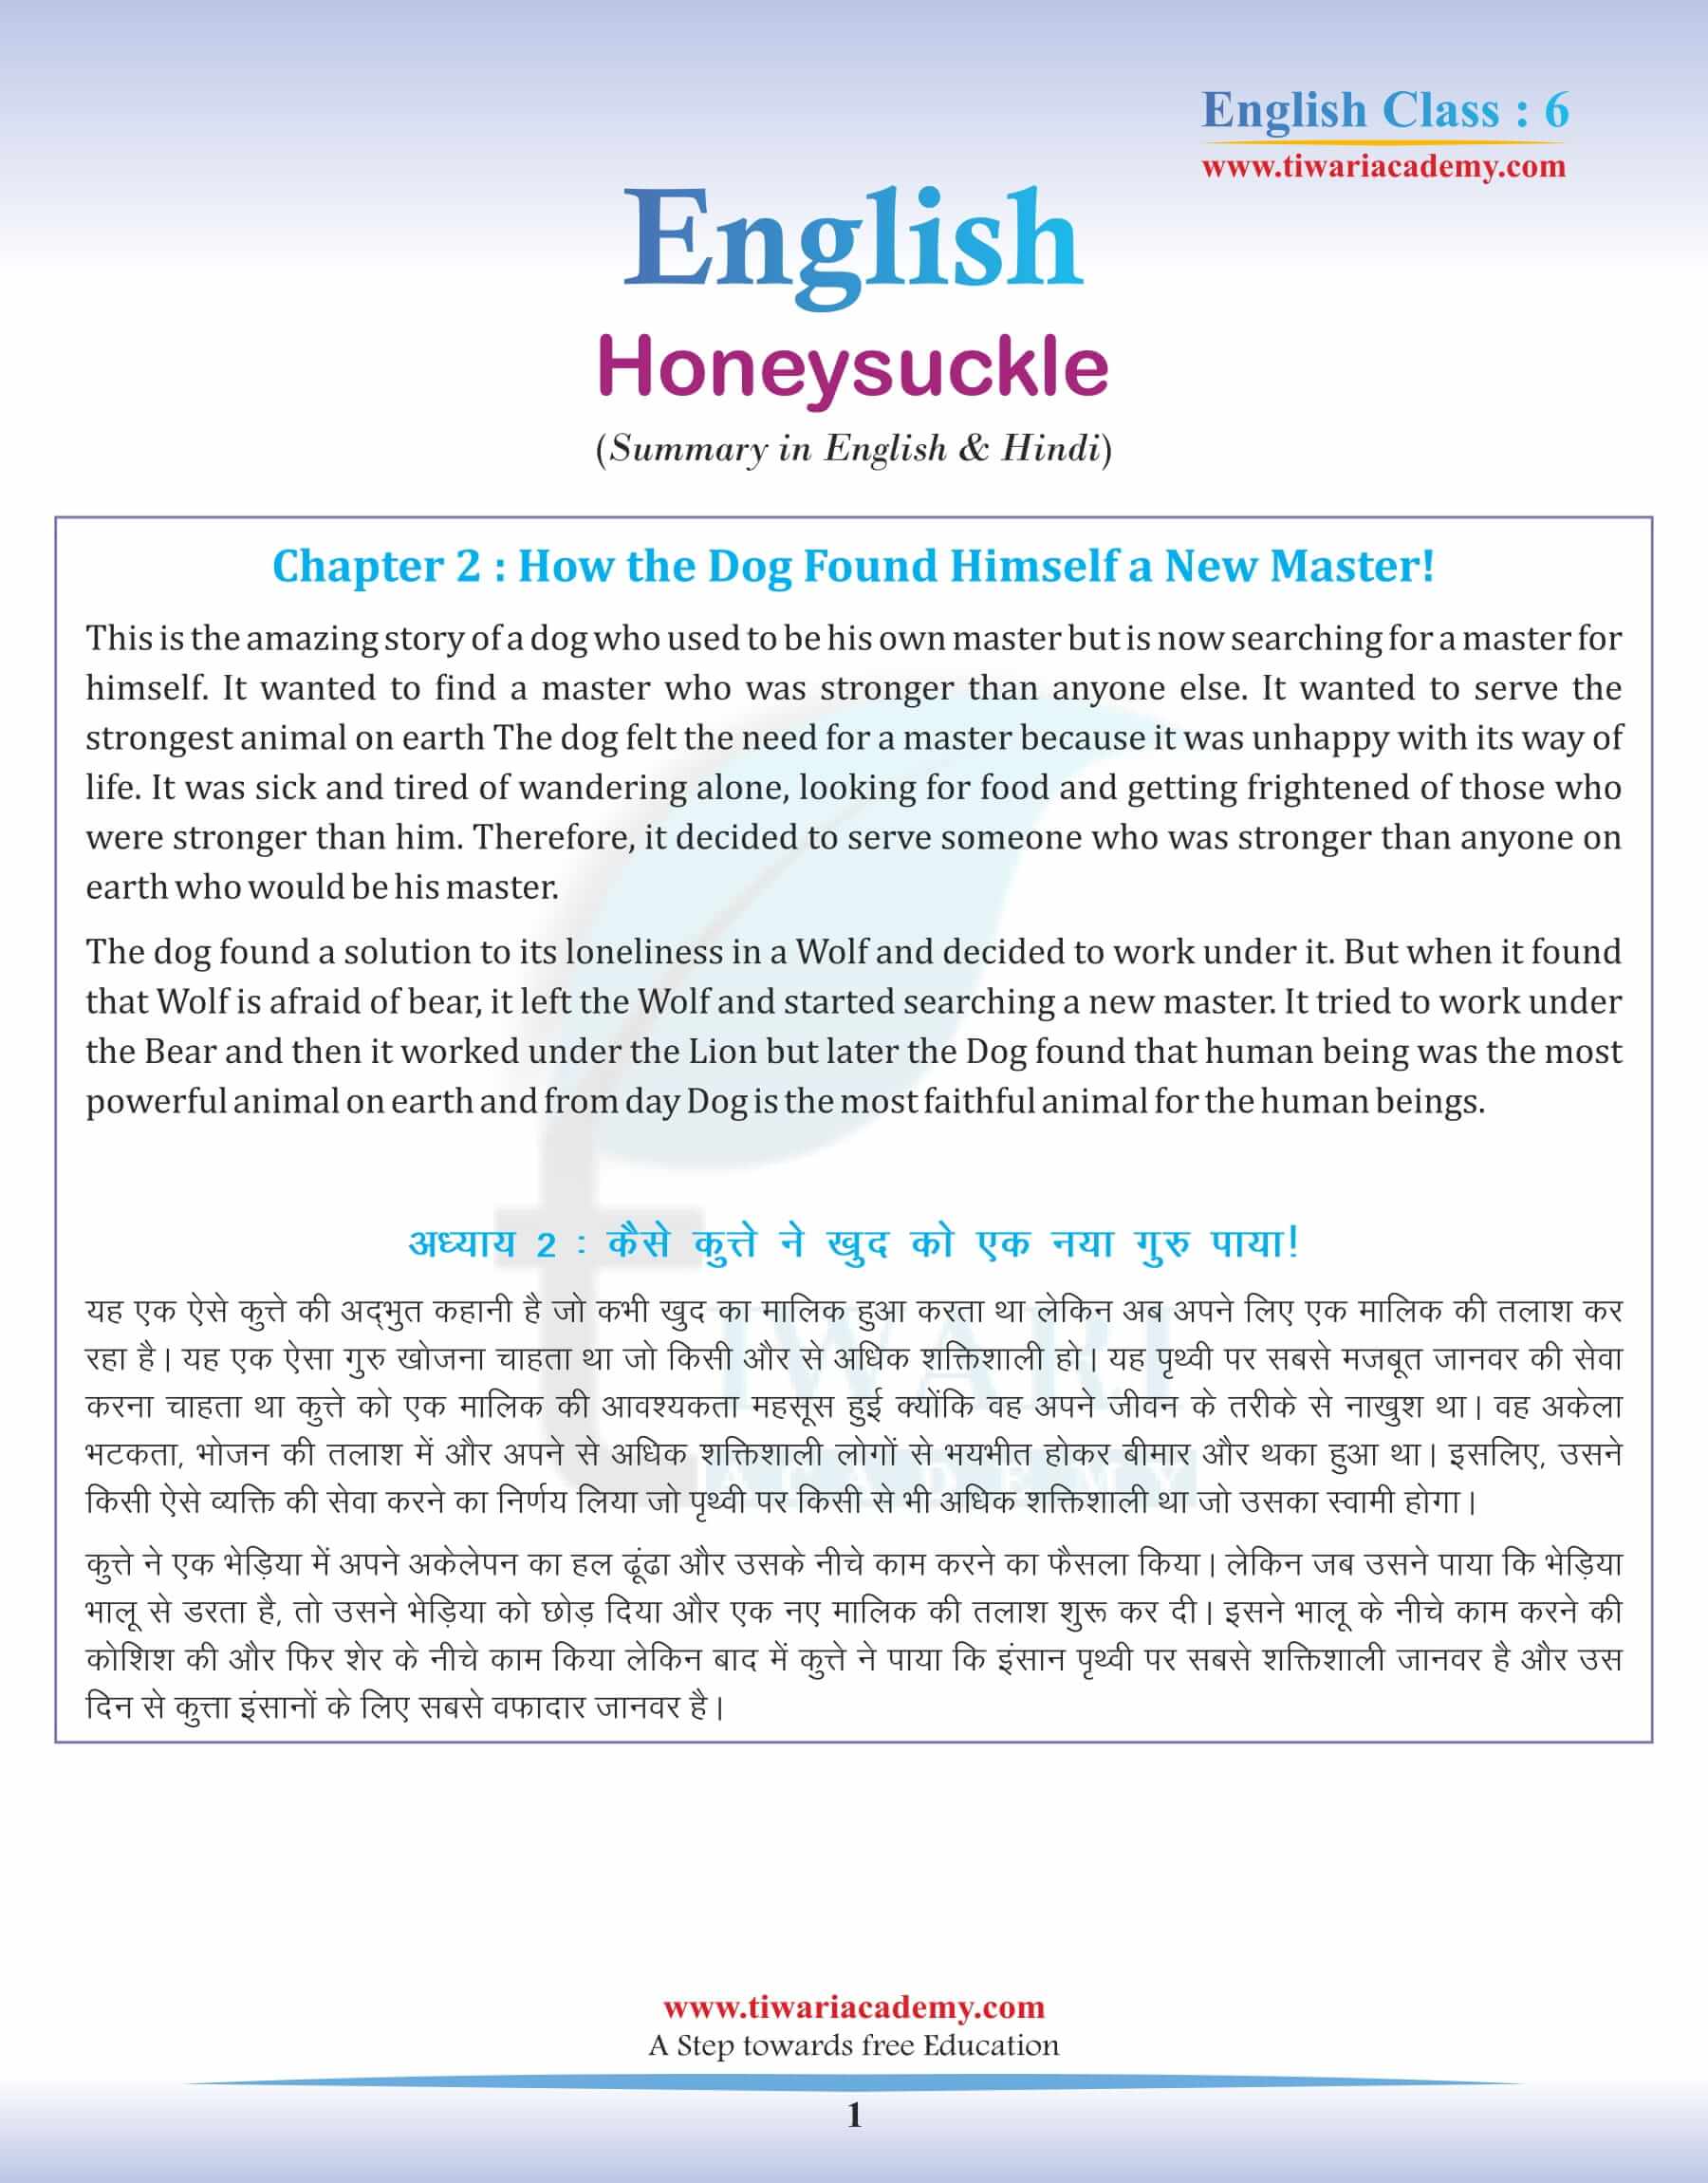 Class 6 English Chapter 2 Summary in Hindi and English